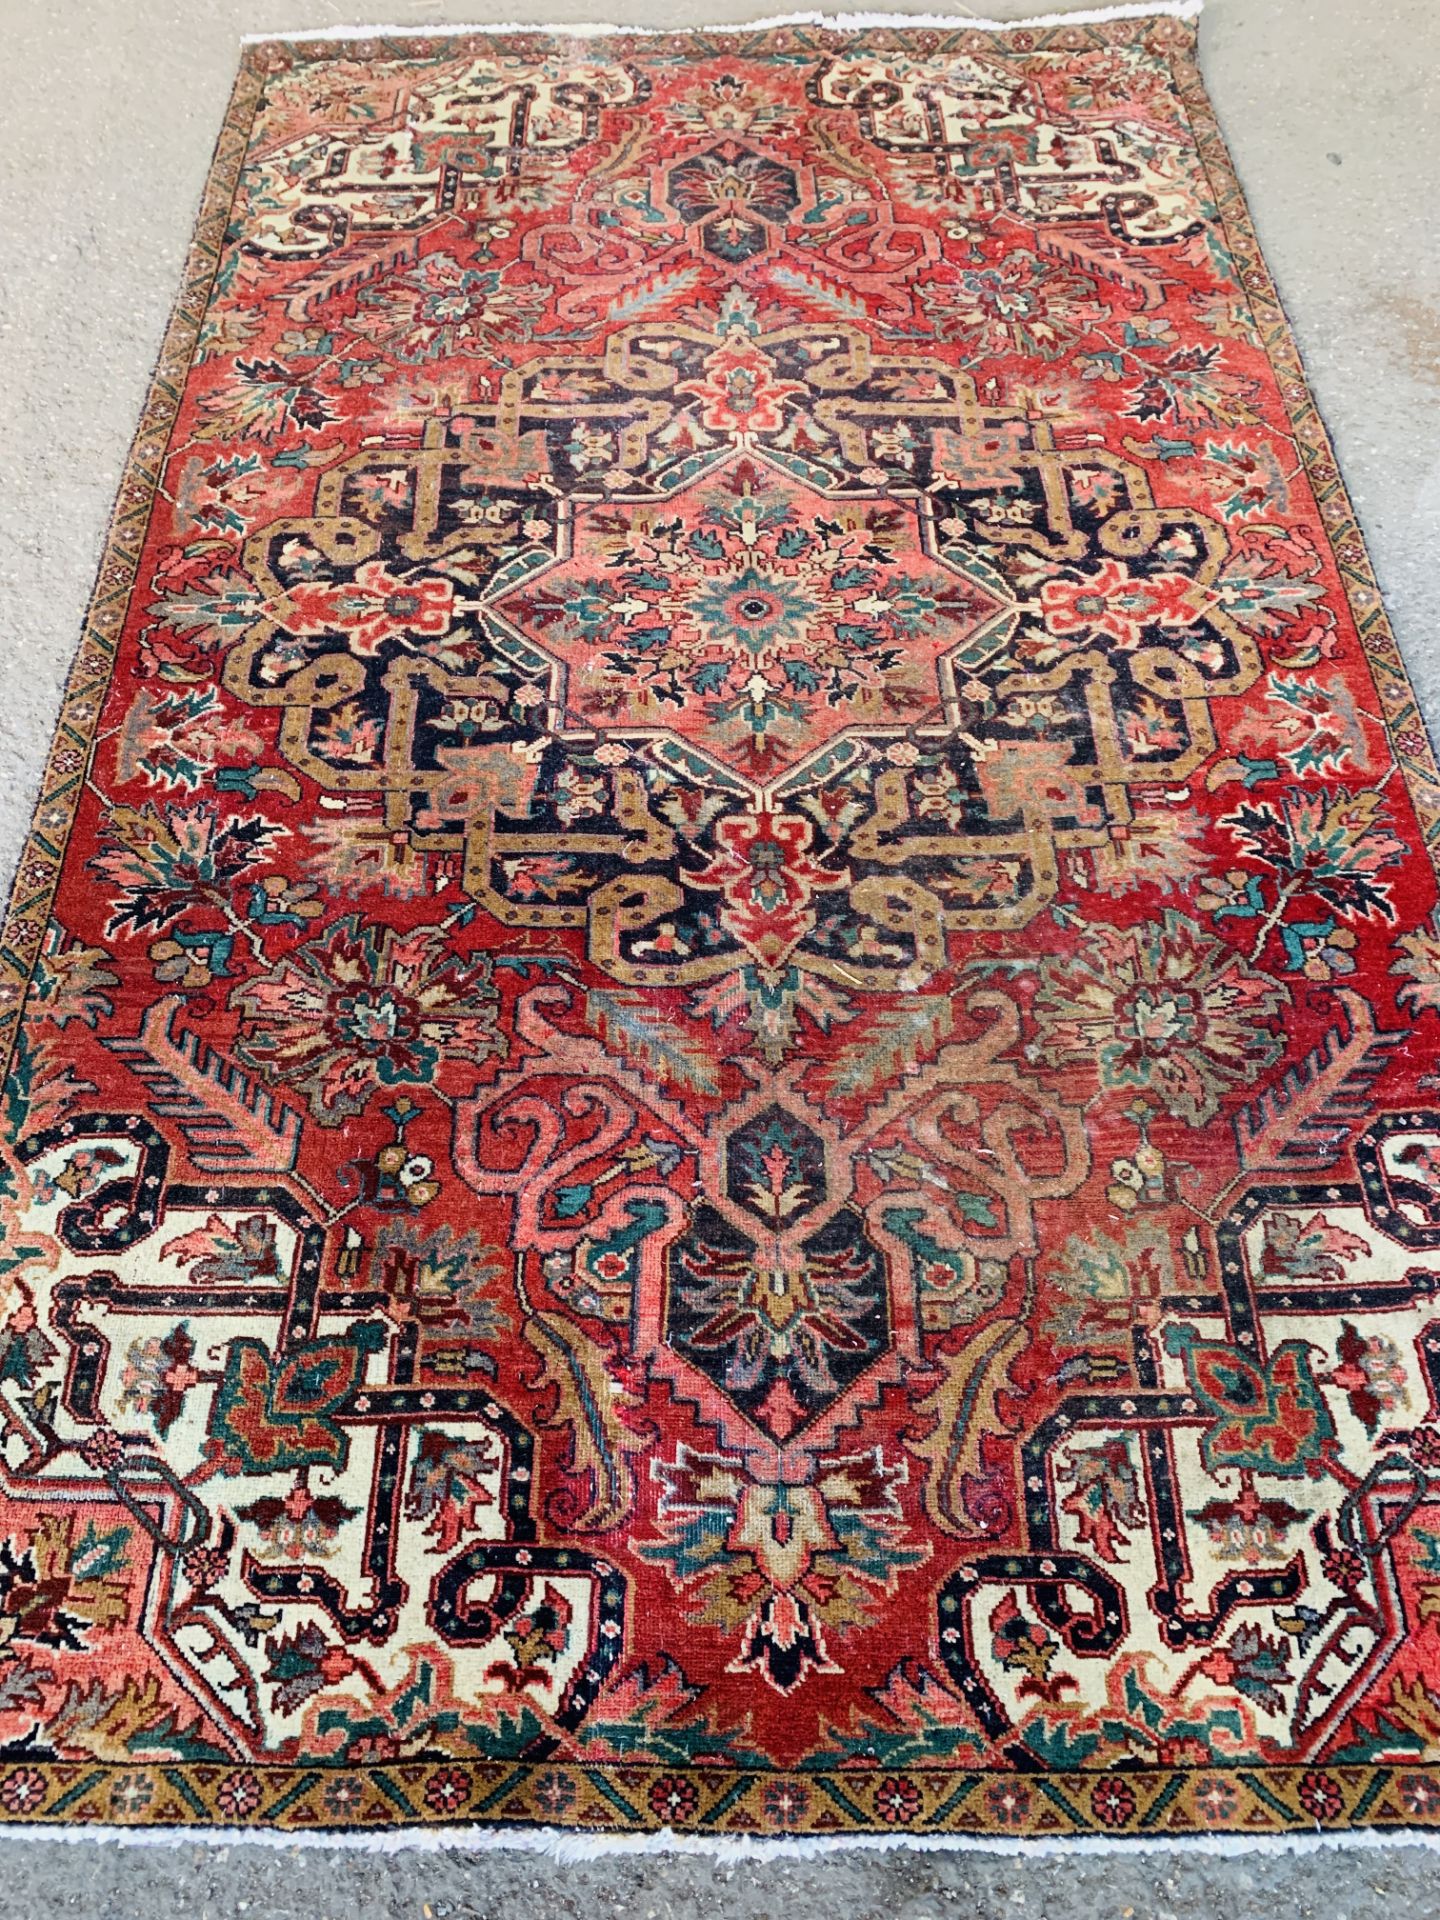 Red and beige ground Iranian wool rug - Image 2 of 2